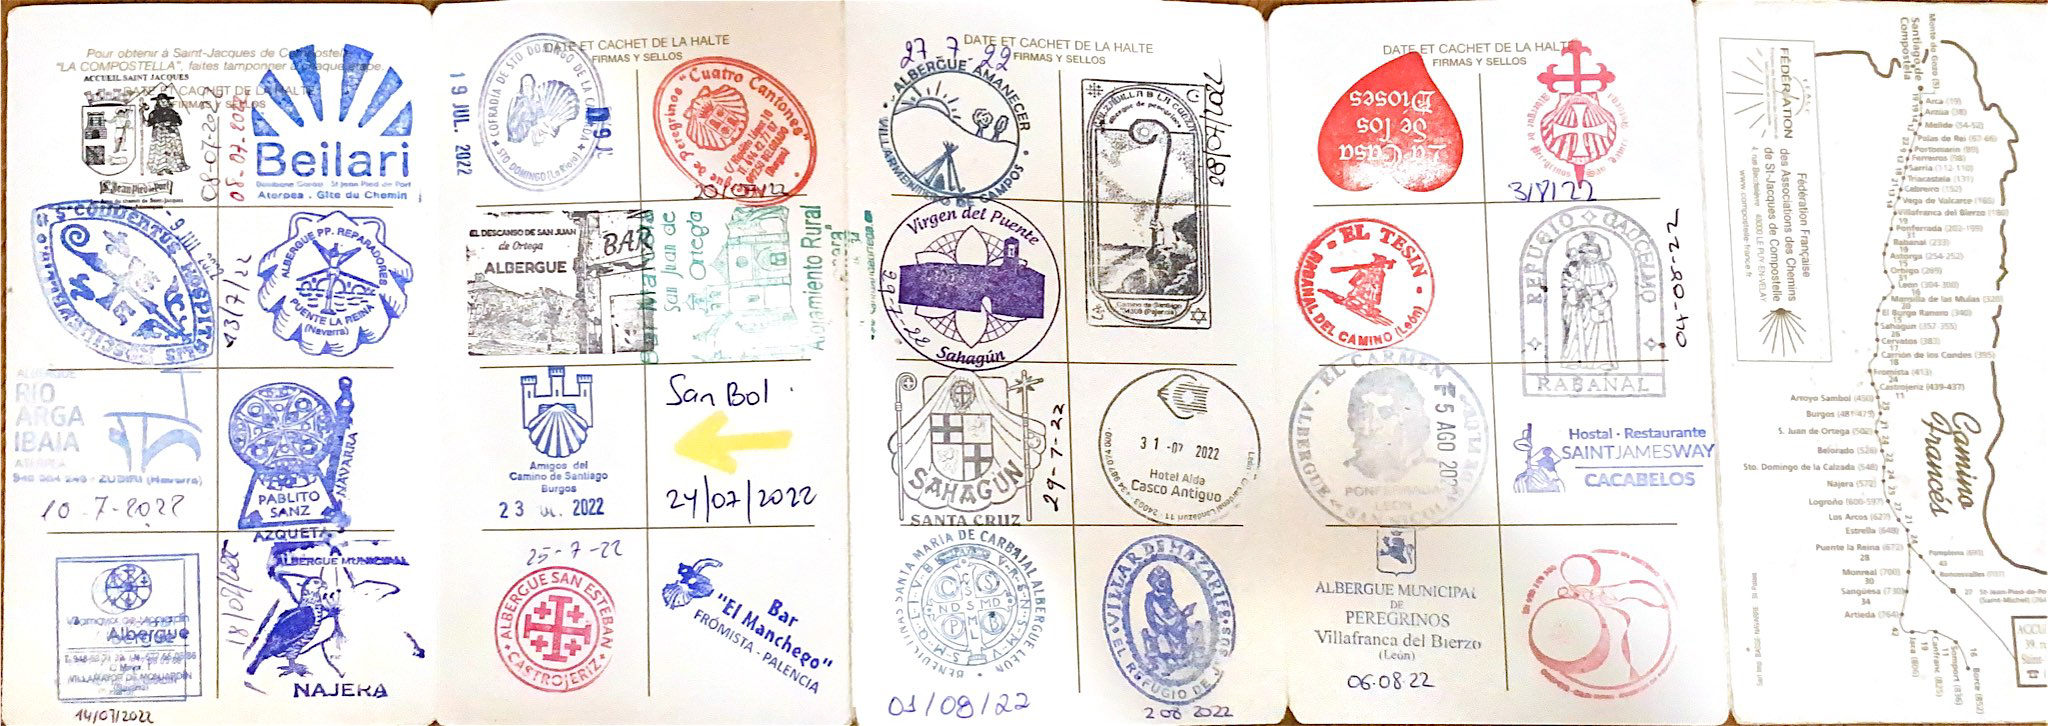 A series of stamps depicting stops along the Camino de Santiago